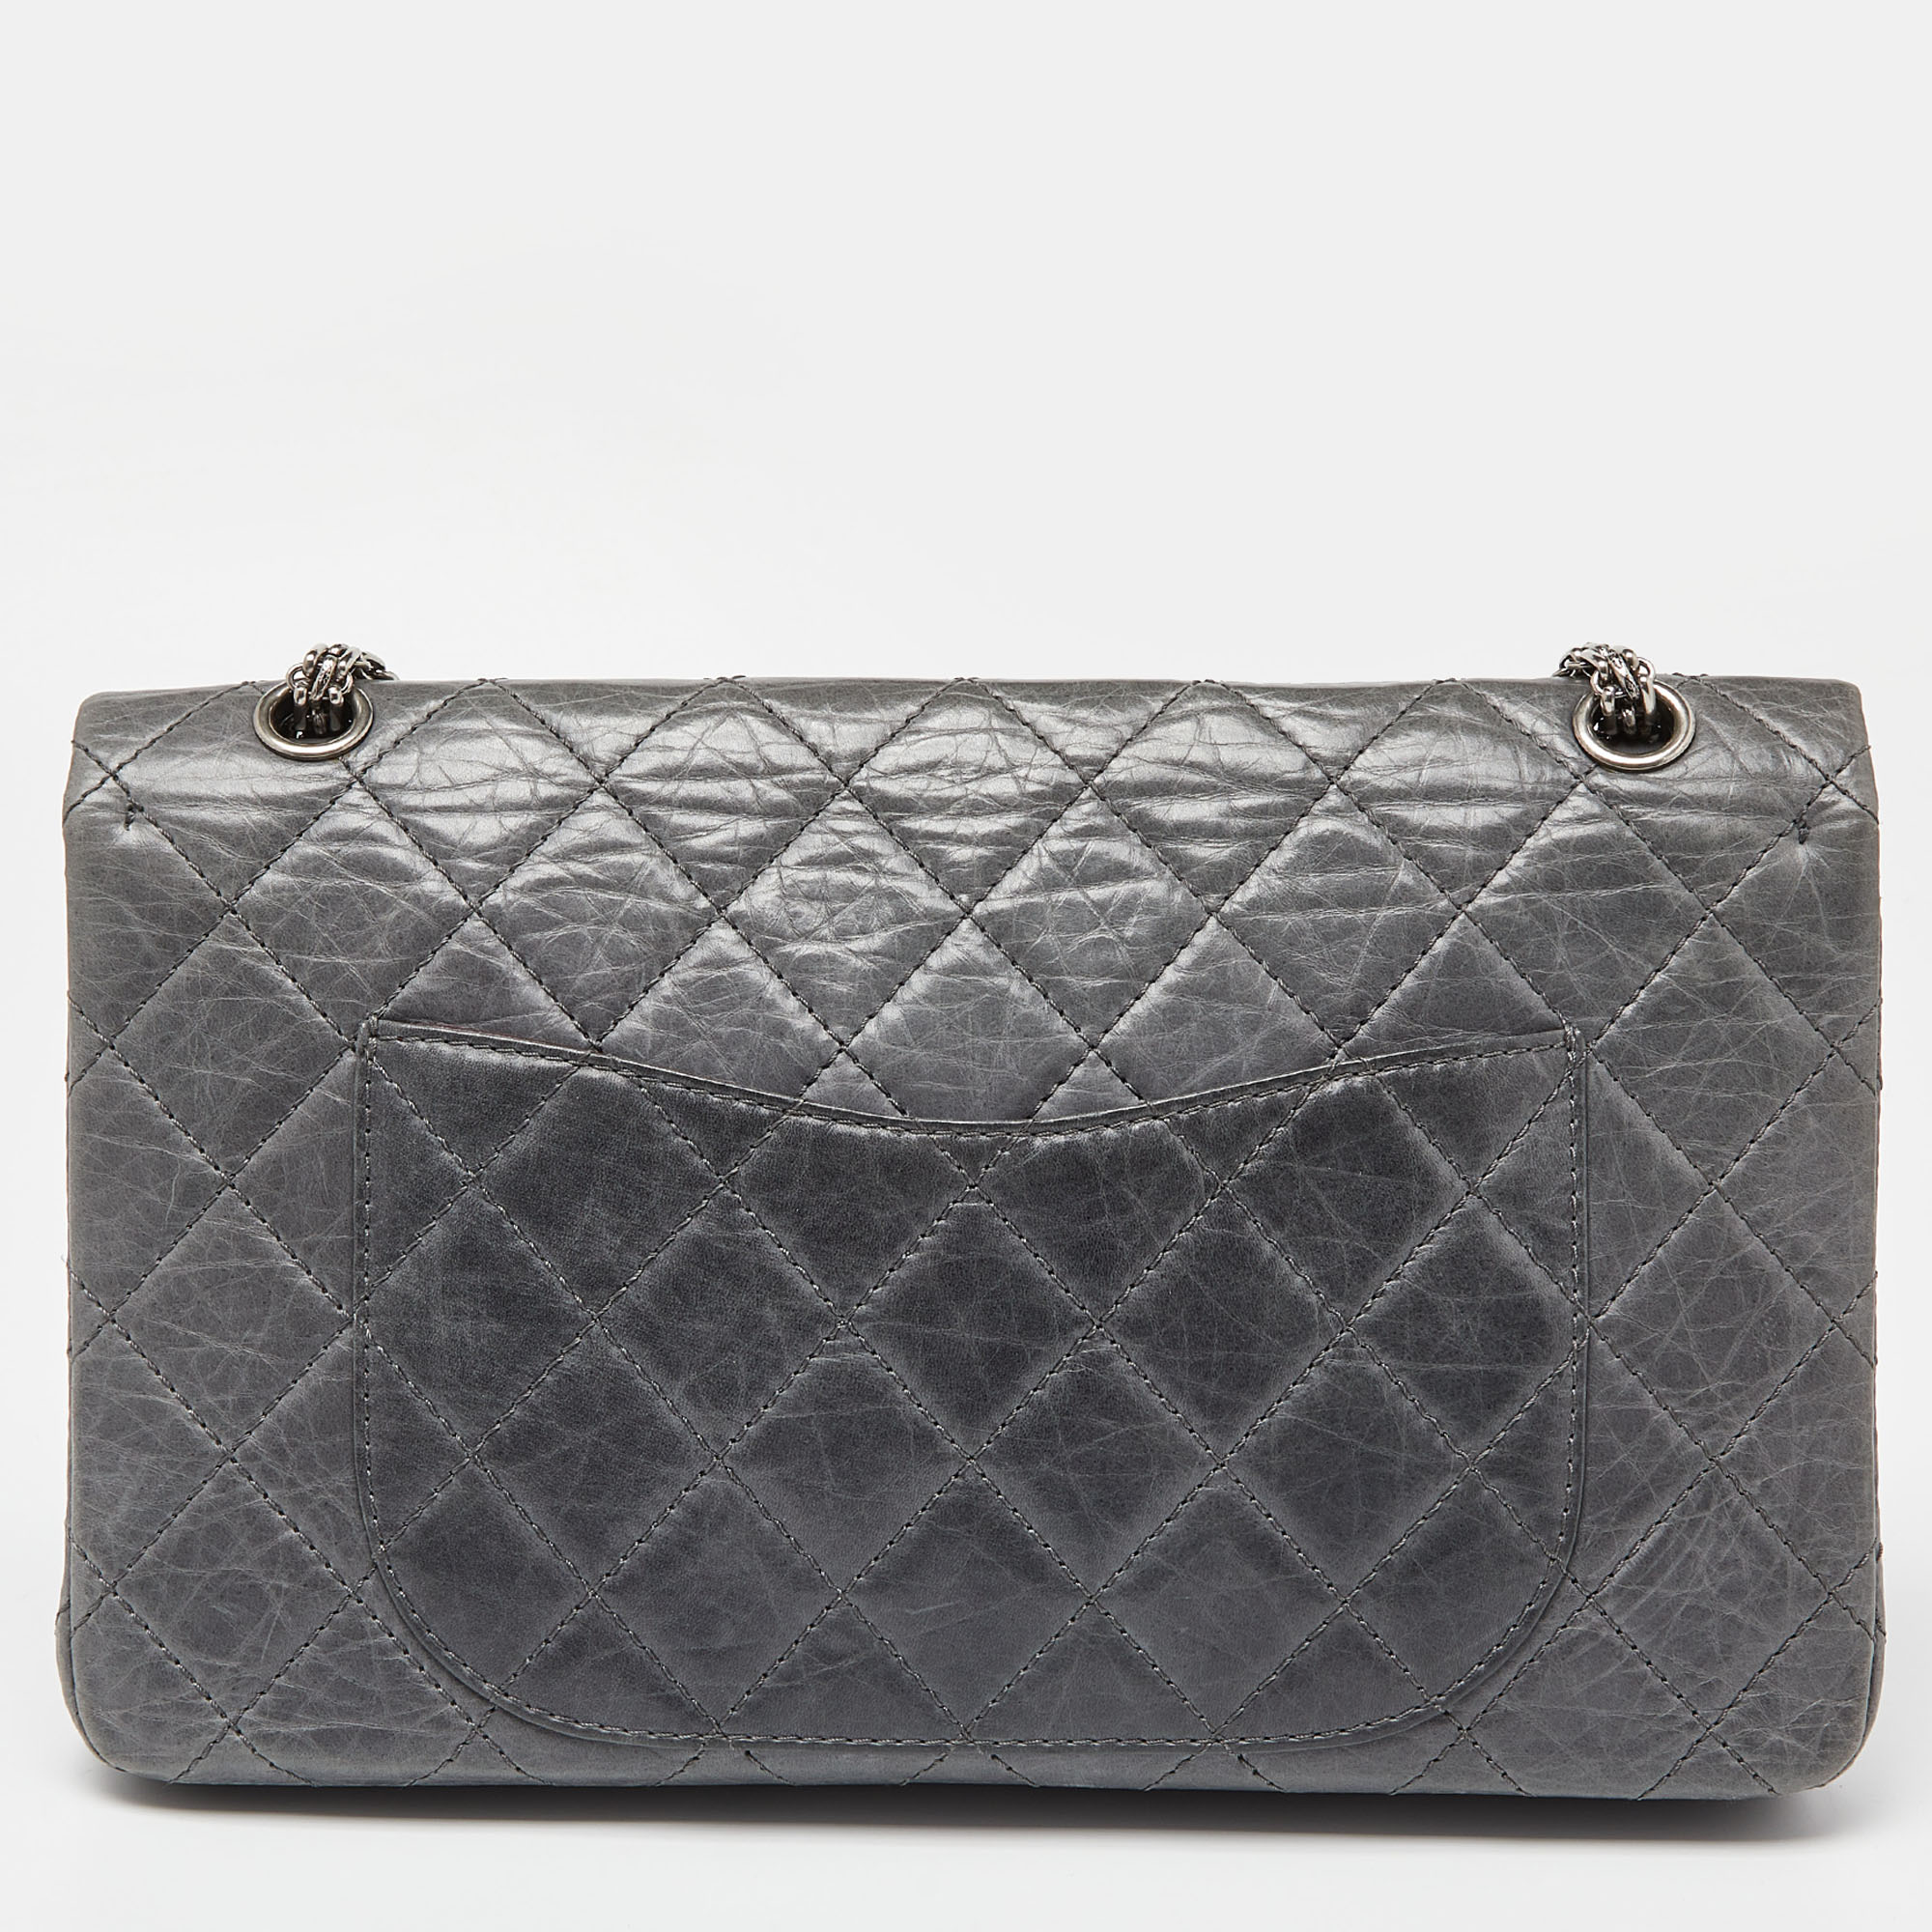 Chanel Grey Quilted Crinkled Leather Limited Edition 50th Anniversary Reissue 2.55 Classic 227 Double Flap Bag